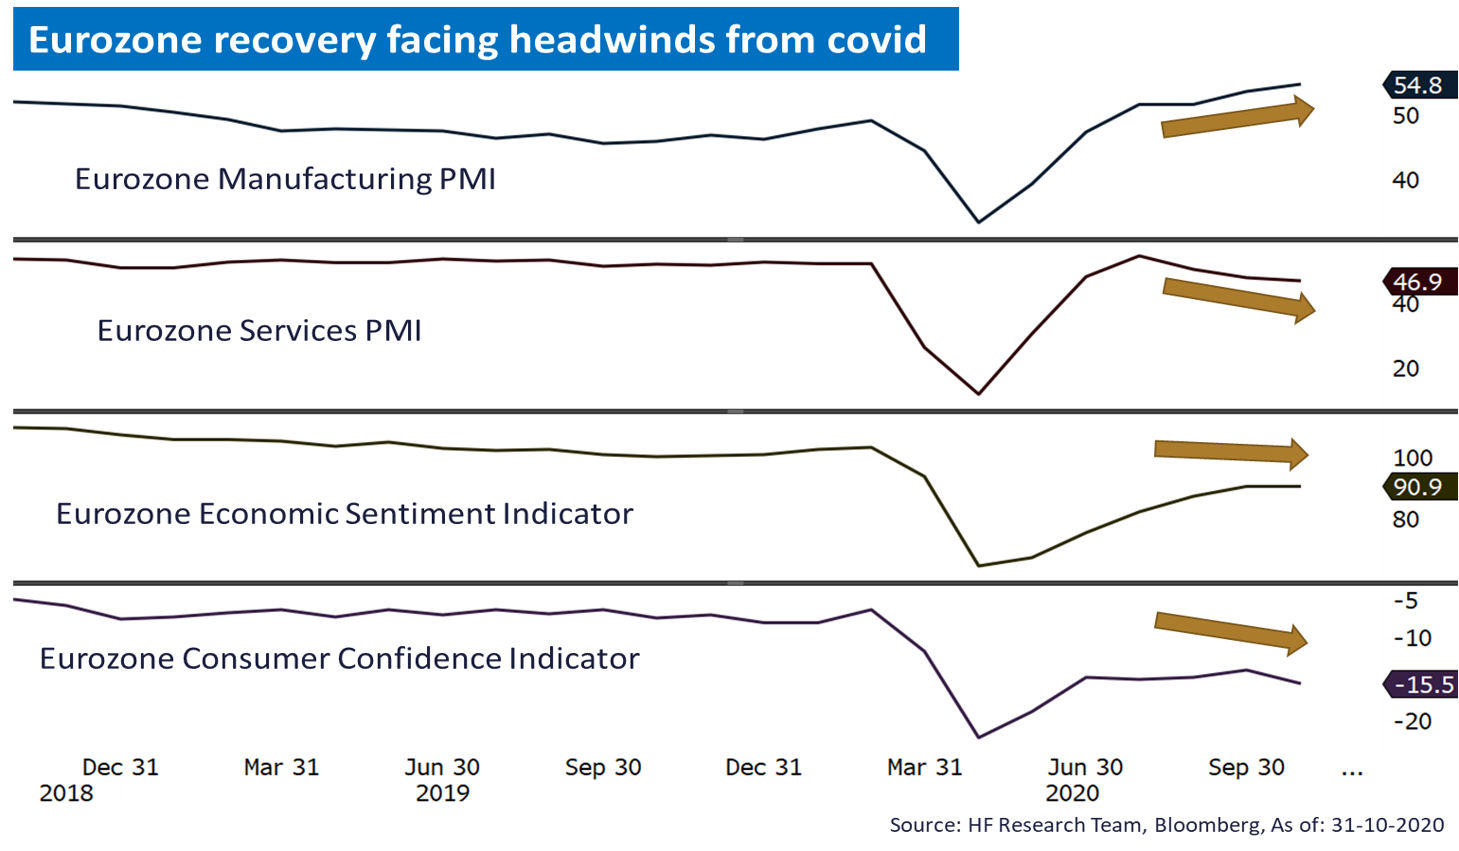 Europe – Resurgence of covid could cause problems